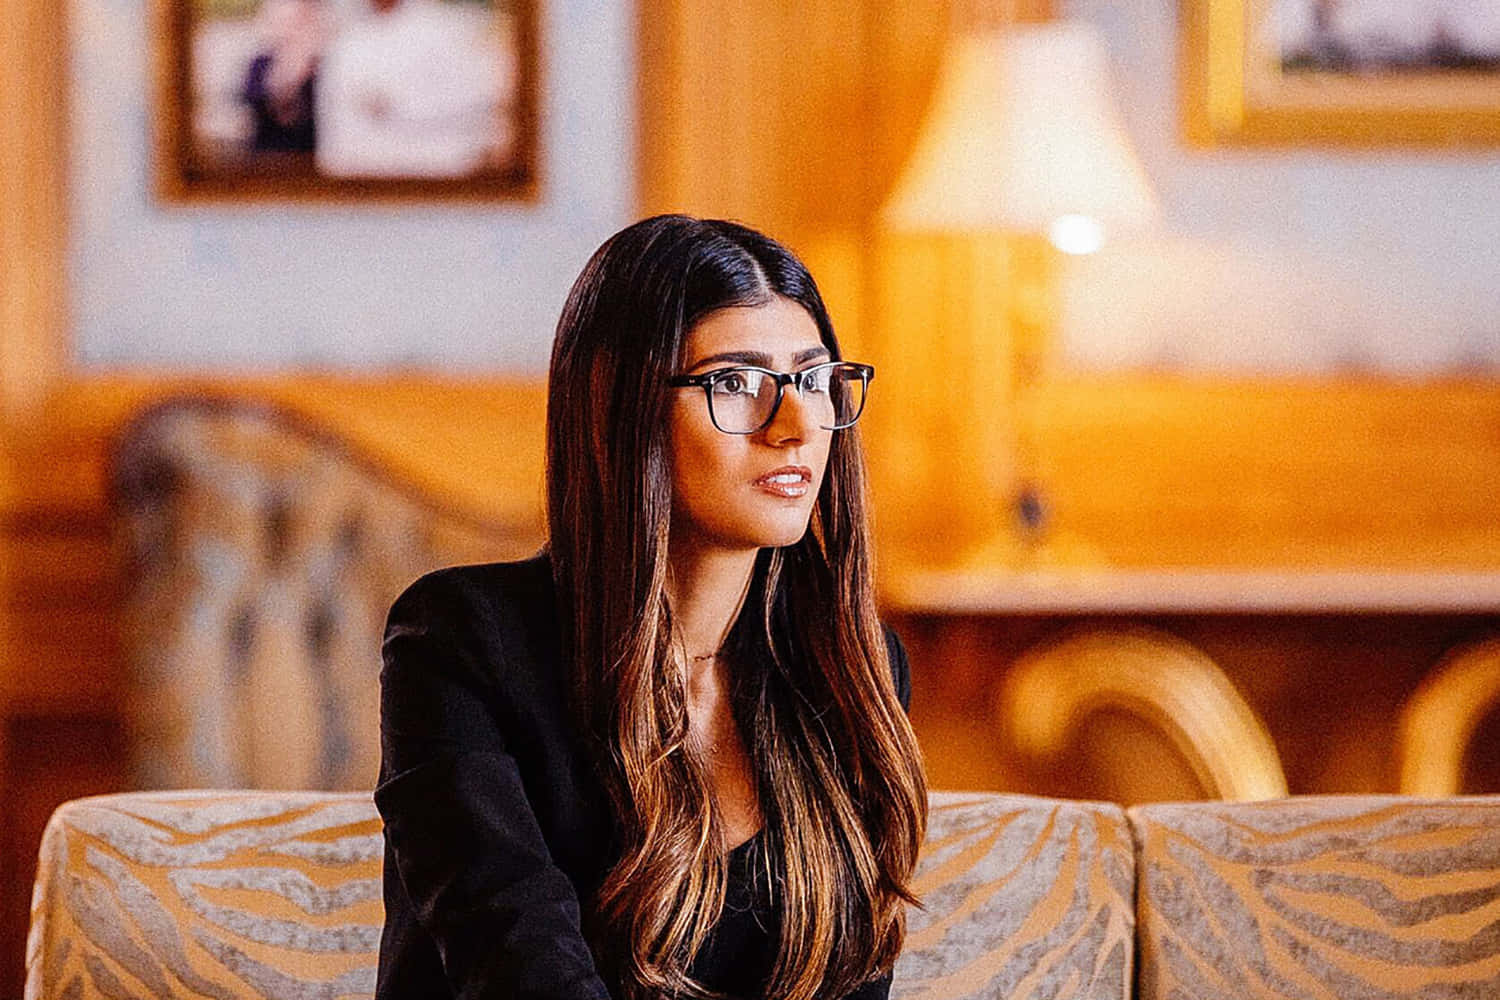 Download Mia Khalifa Is An Iconic Entertainer And Influencer In The Adult Entertainment Industry